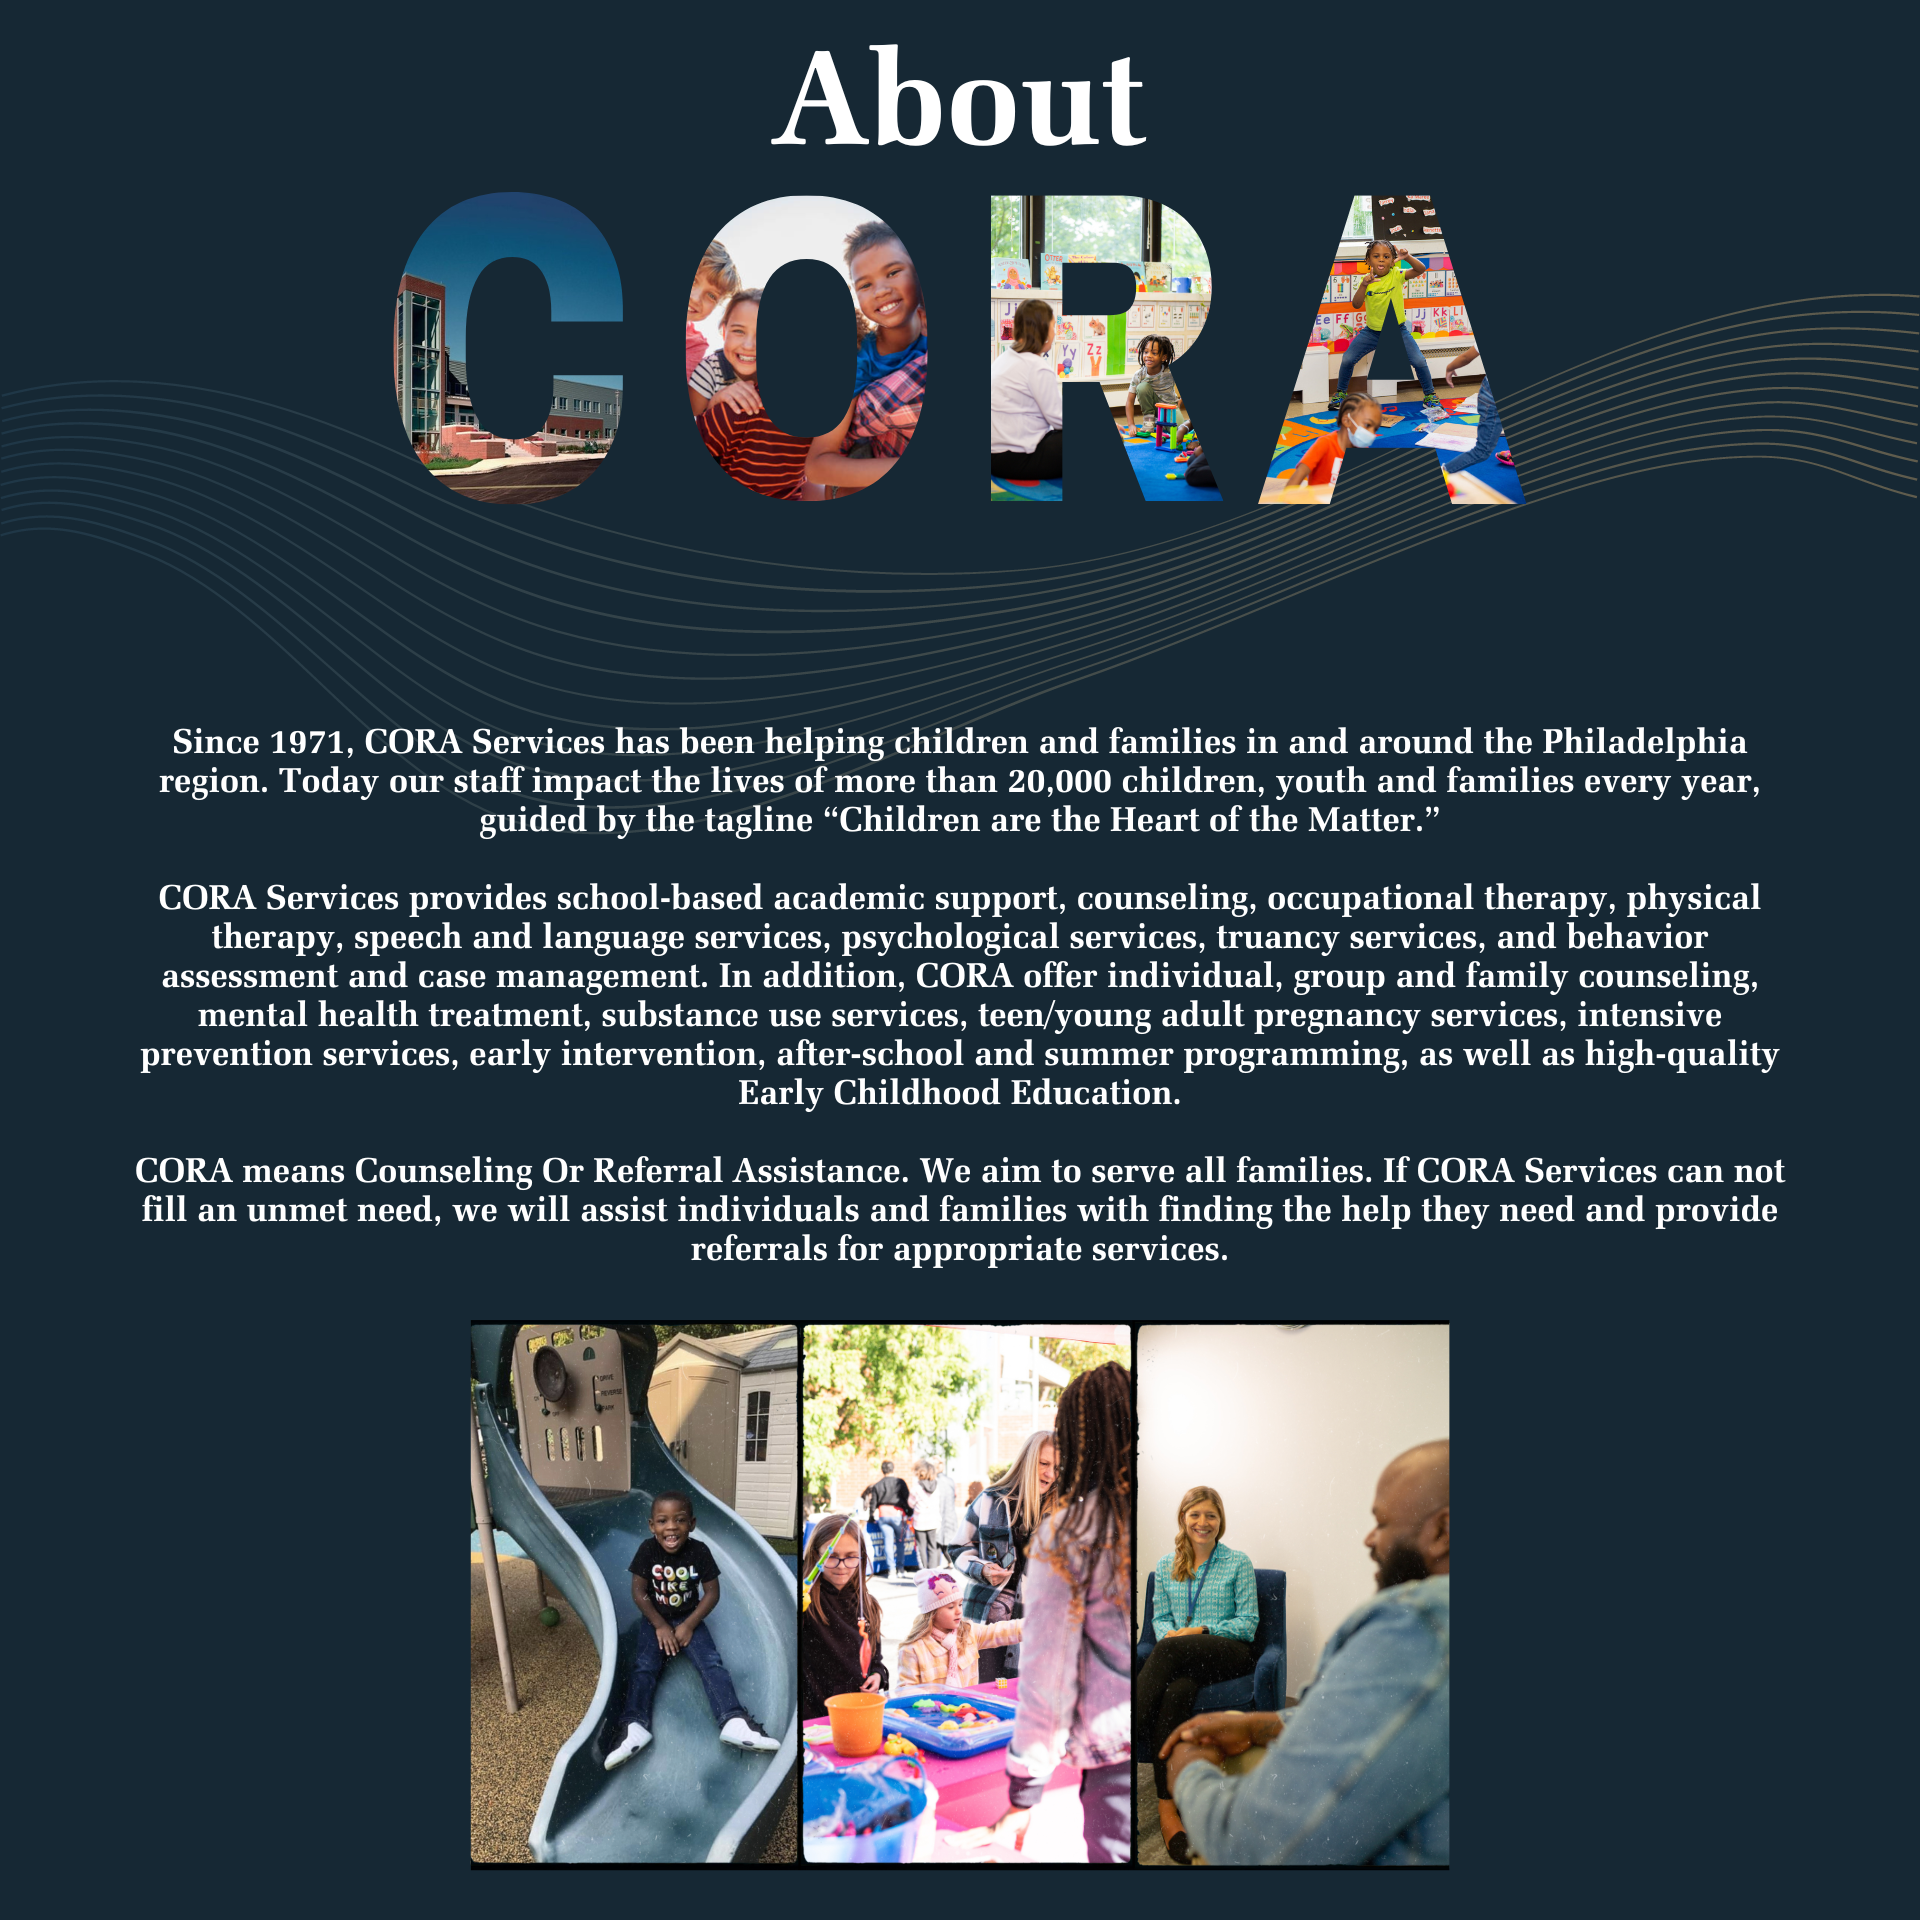 About CORA Services